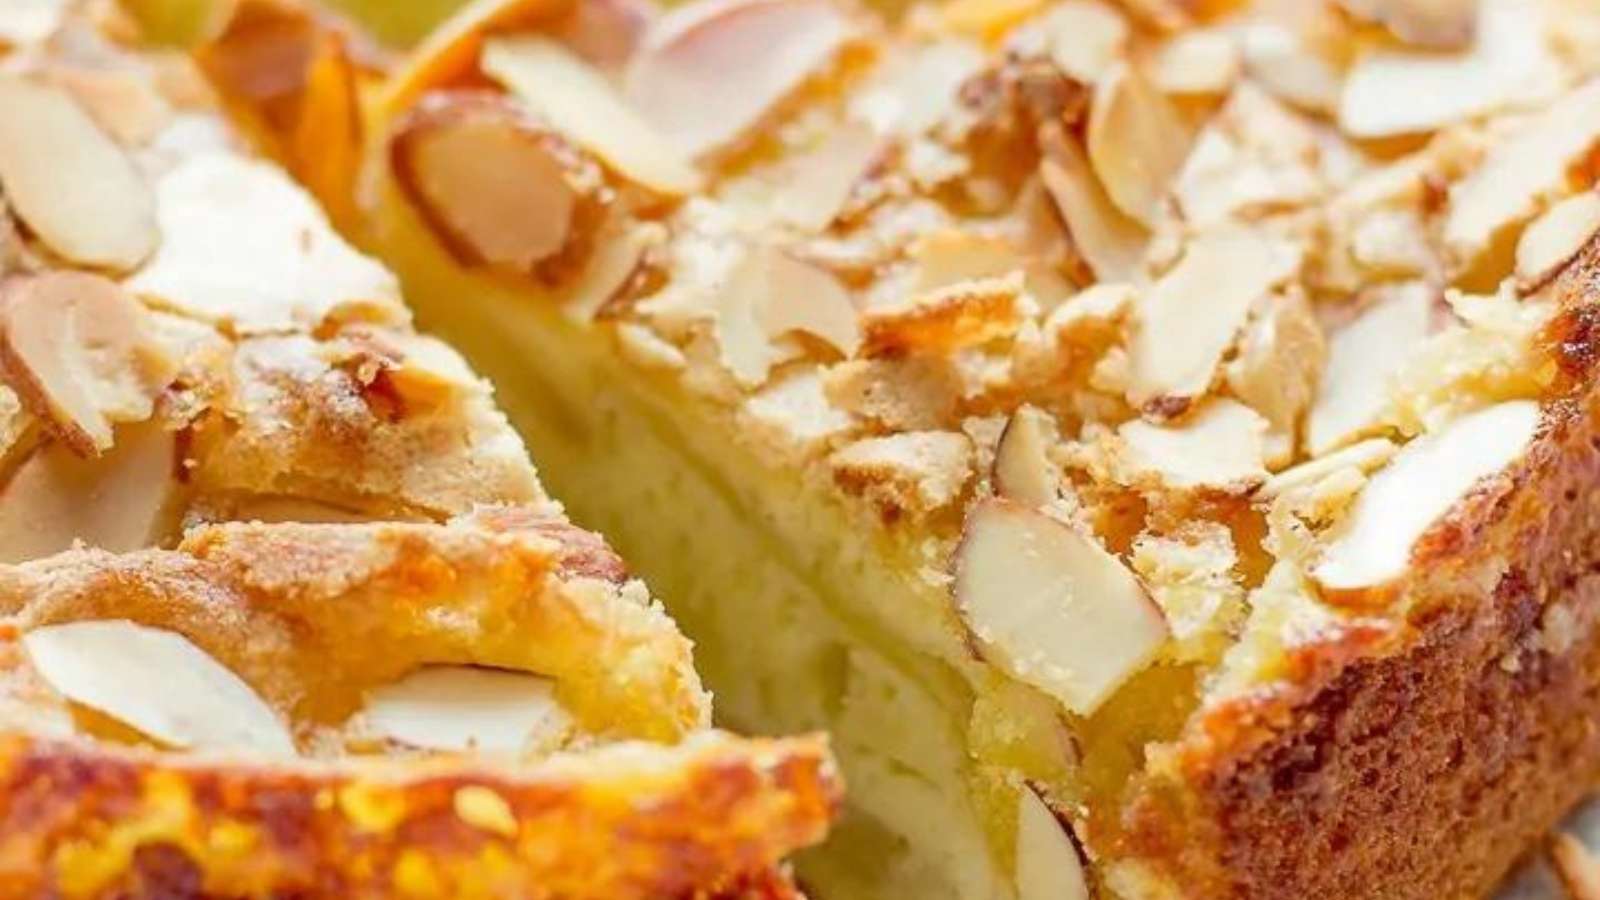 A slice of cake with almonds on top.